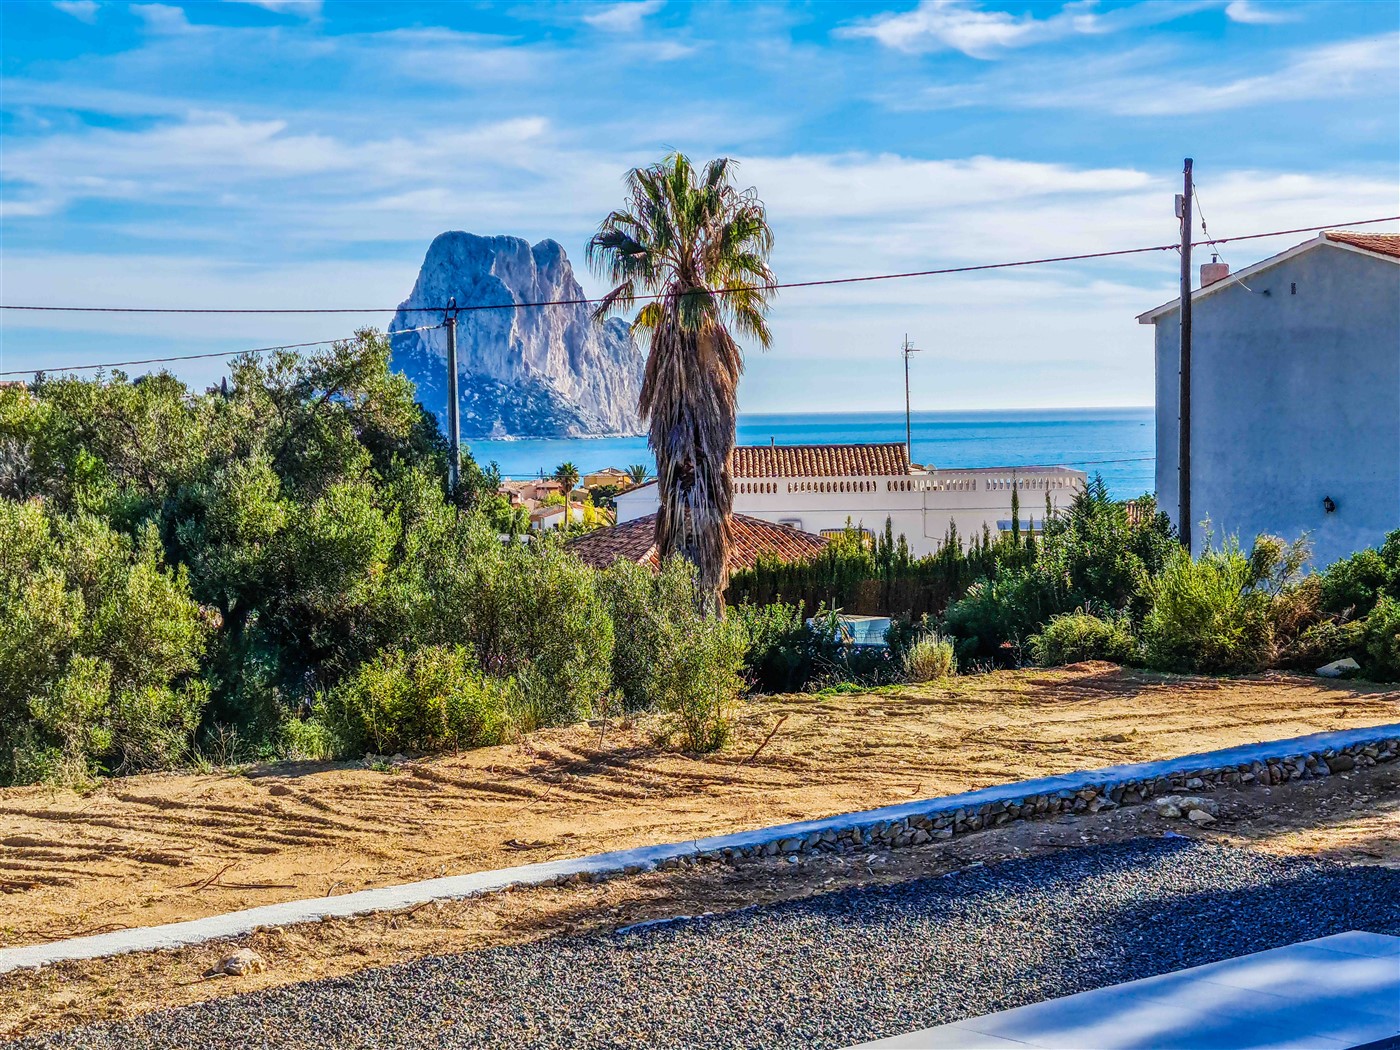 New Property for sale in Calpe, Costa Blanca, Spain.